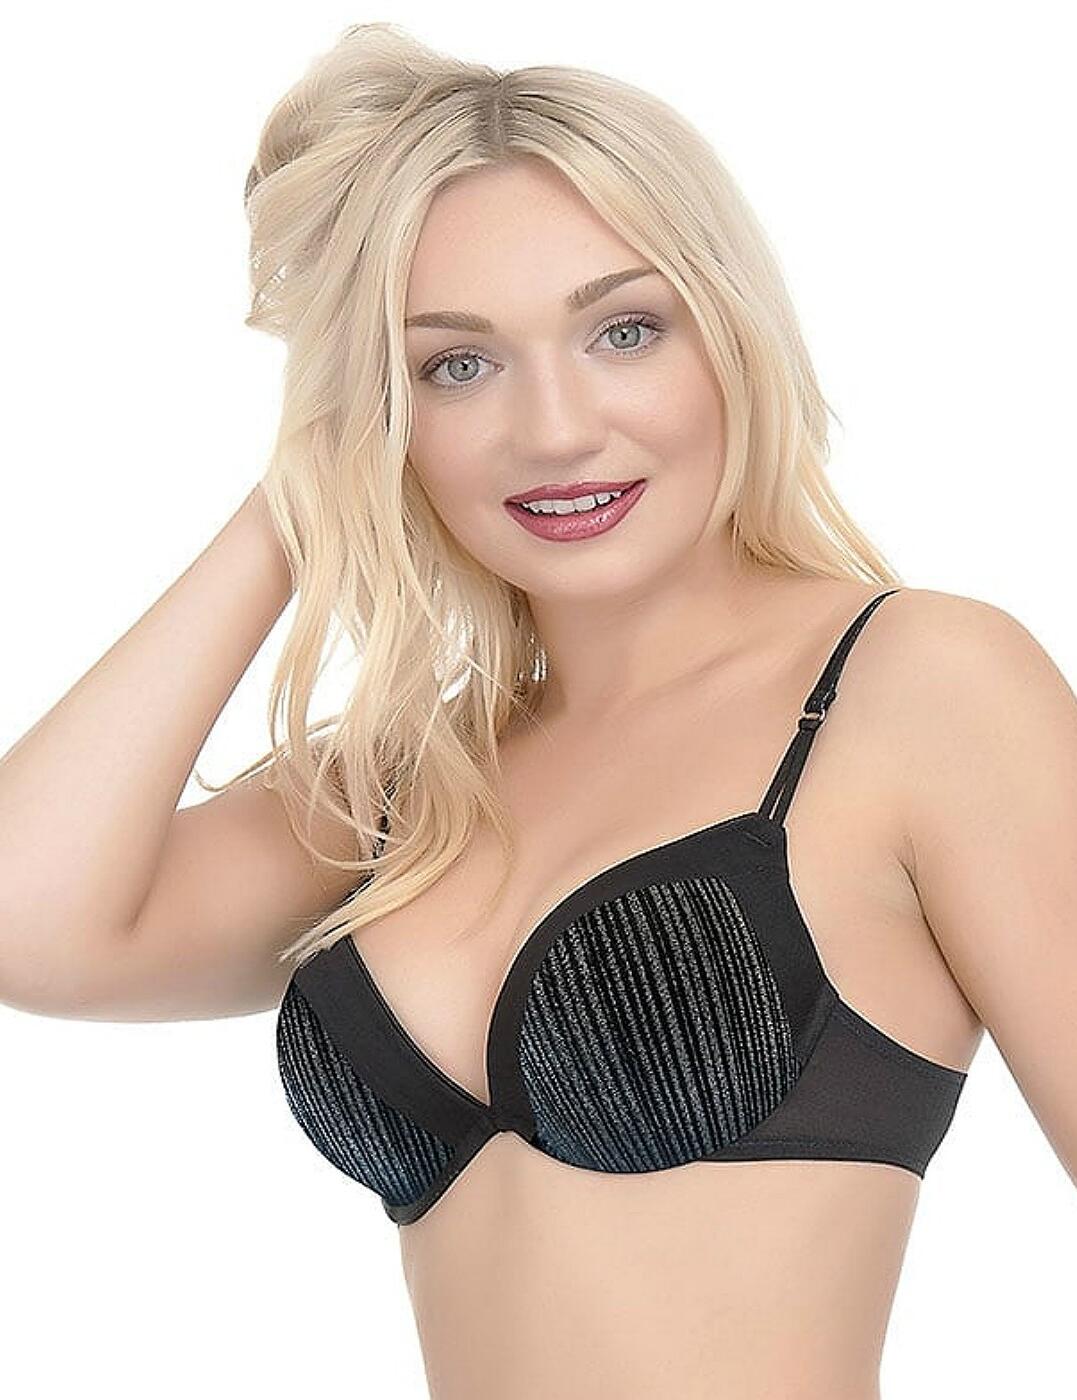 358101 Ultimo Cassia OMG Underwired Plunge Bra (A-D CUP) - 385101 Noir